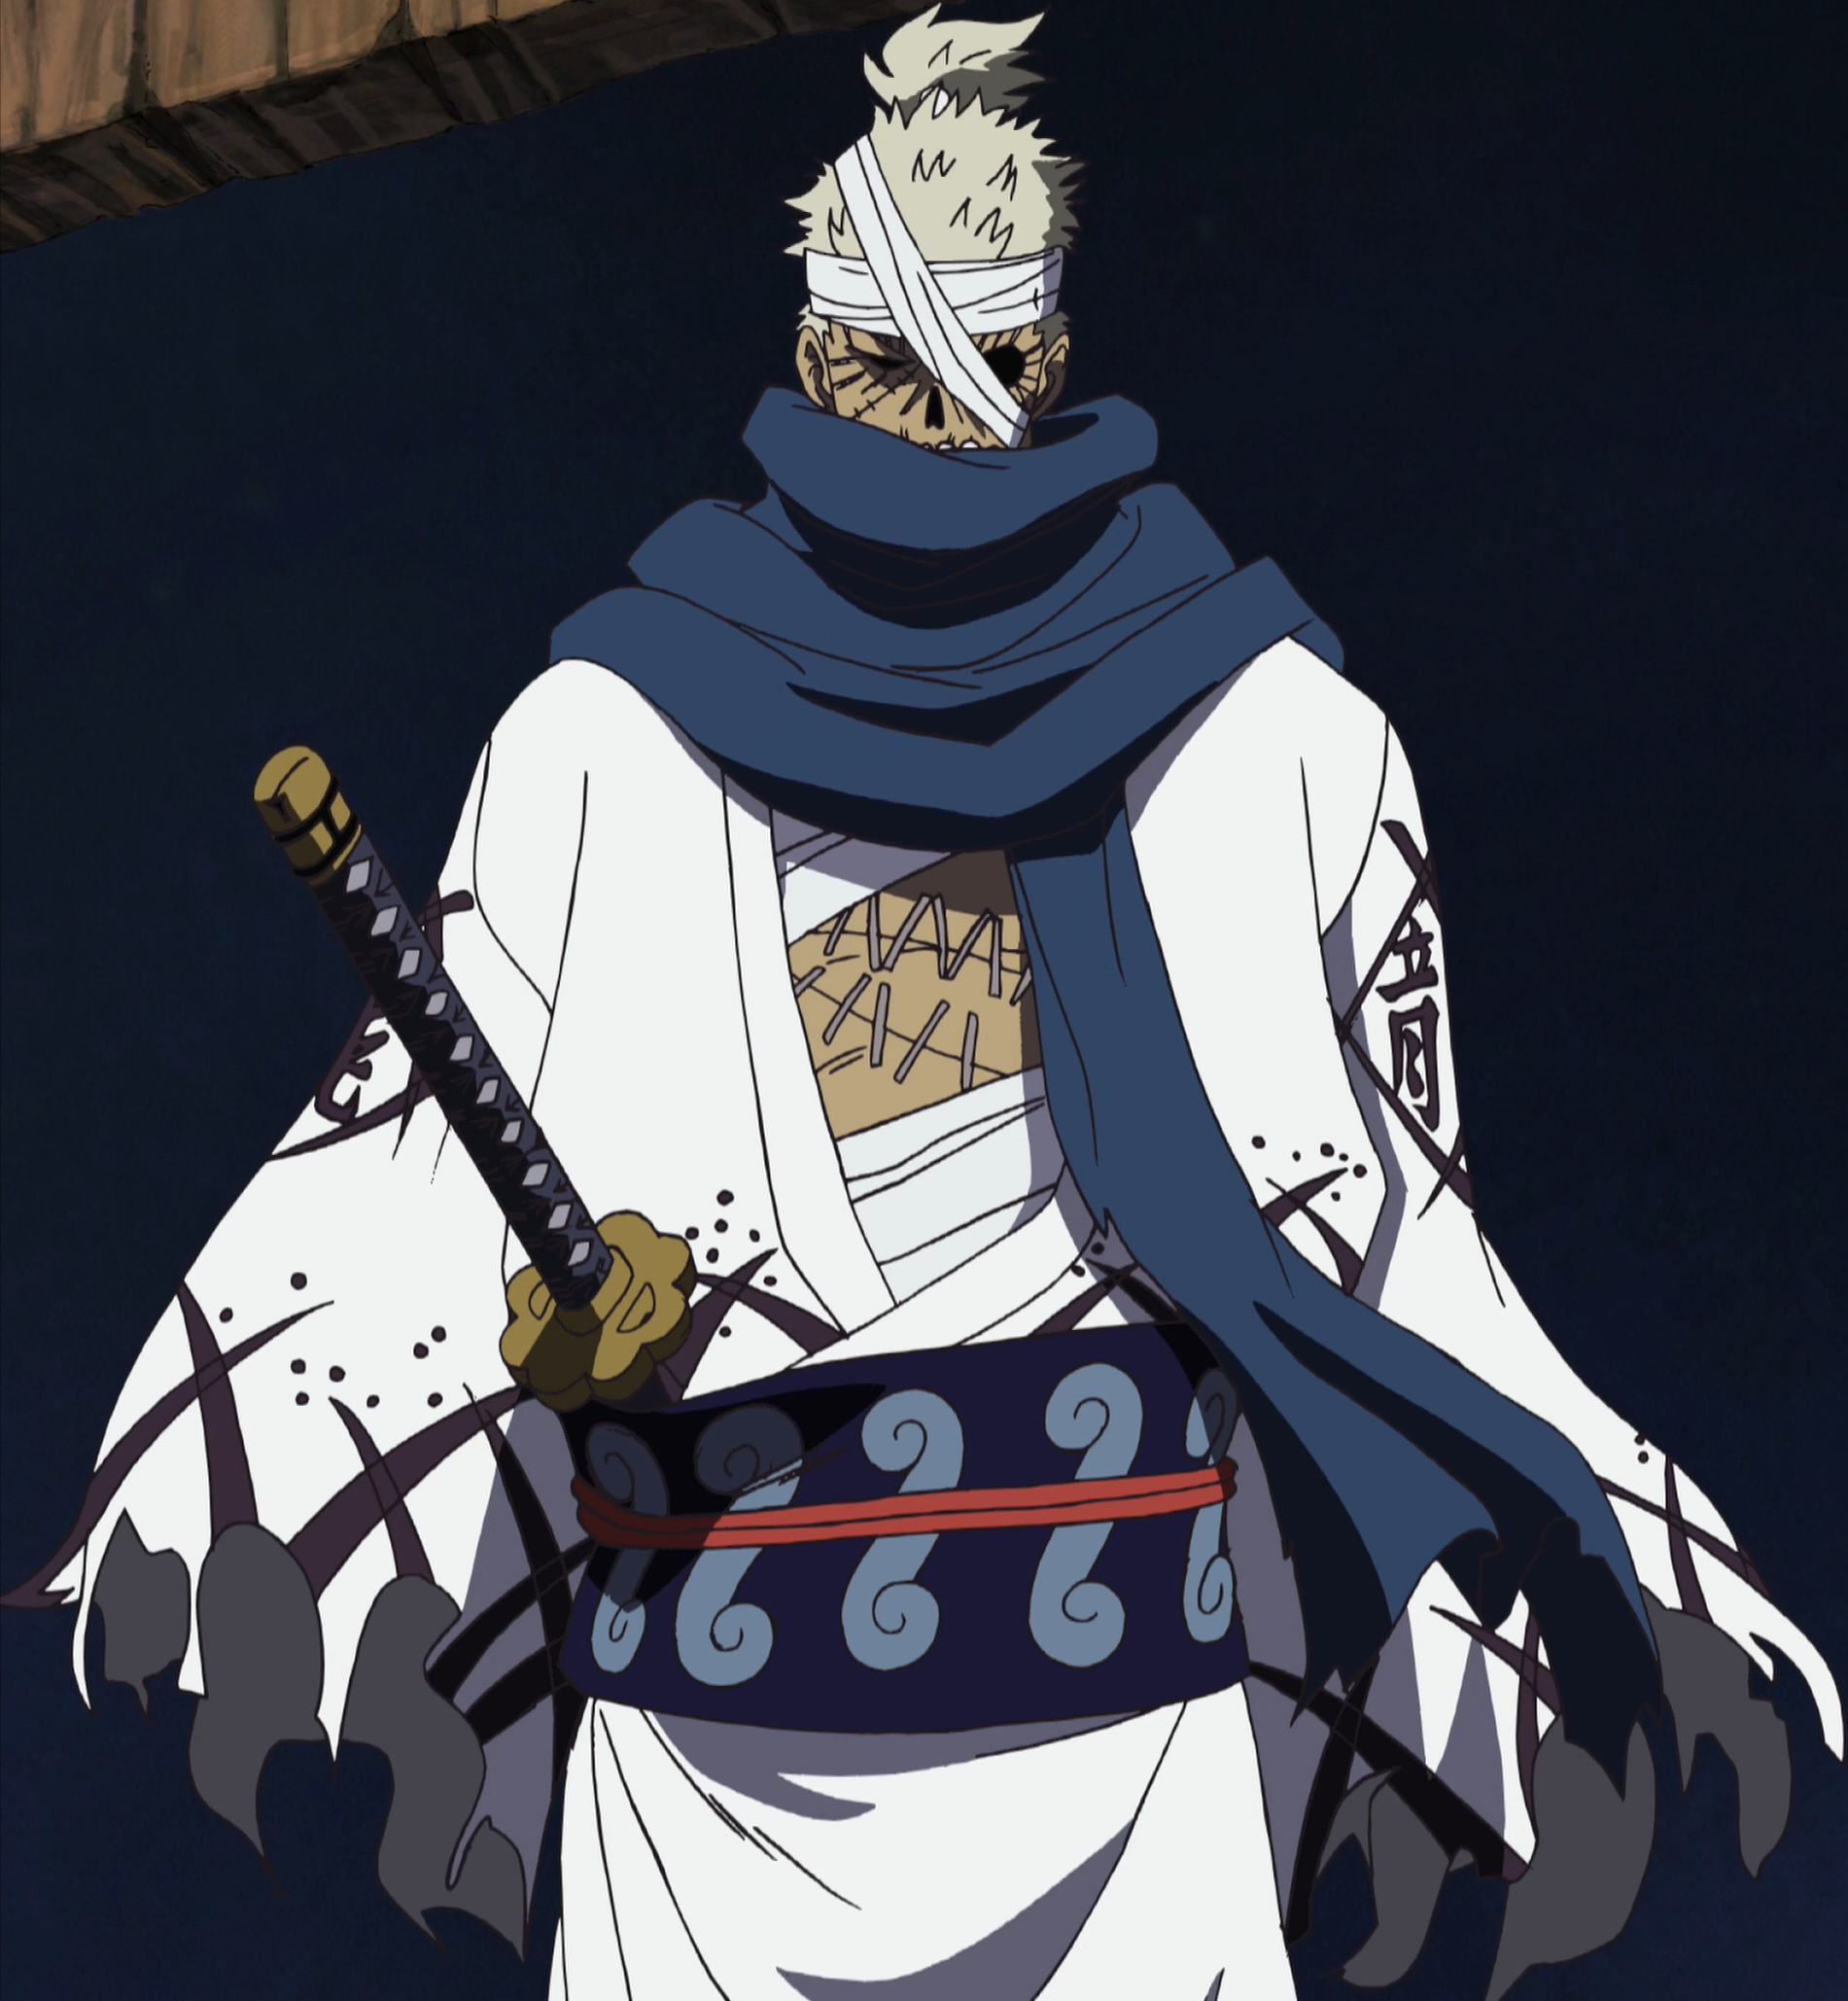 The Greatest Samurai of Wano Country! Kozuki Oden Appears! (2021)